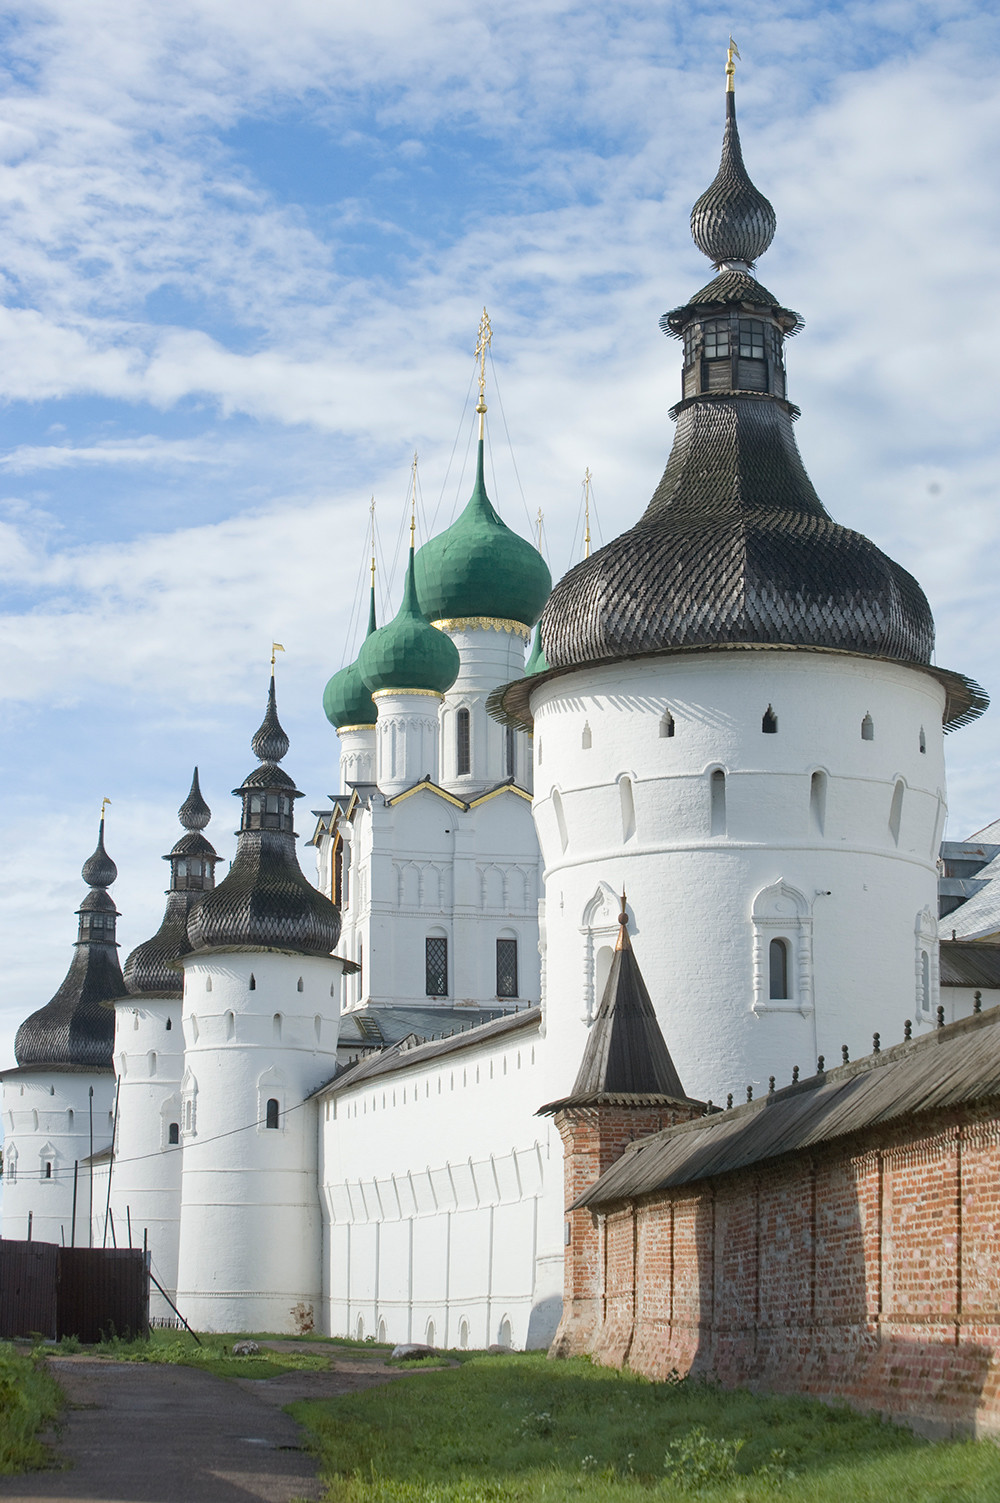 Rostov kremlin. West wall with Church of St. John the Divine over West Gate. Southwest view. July 2019